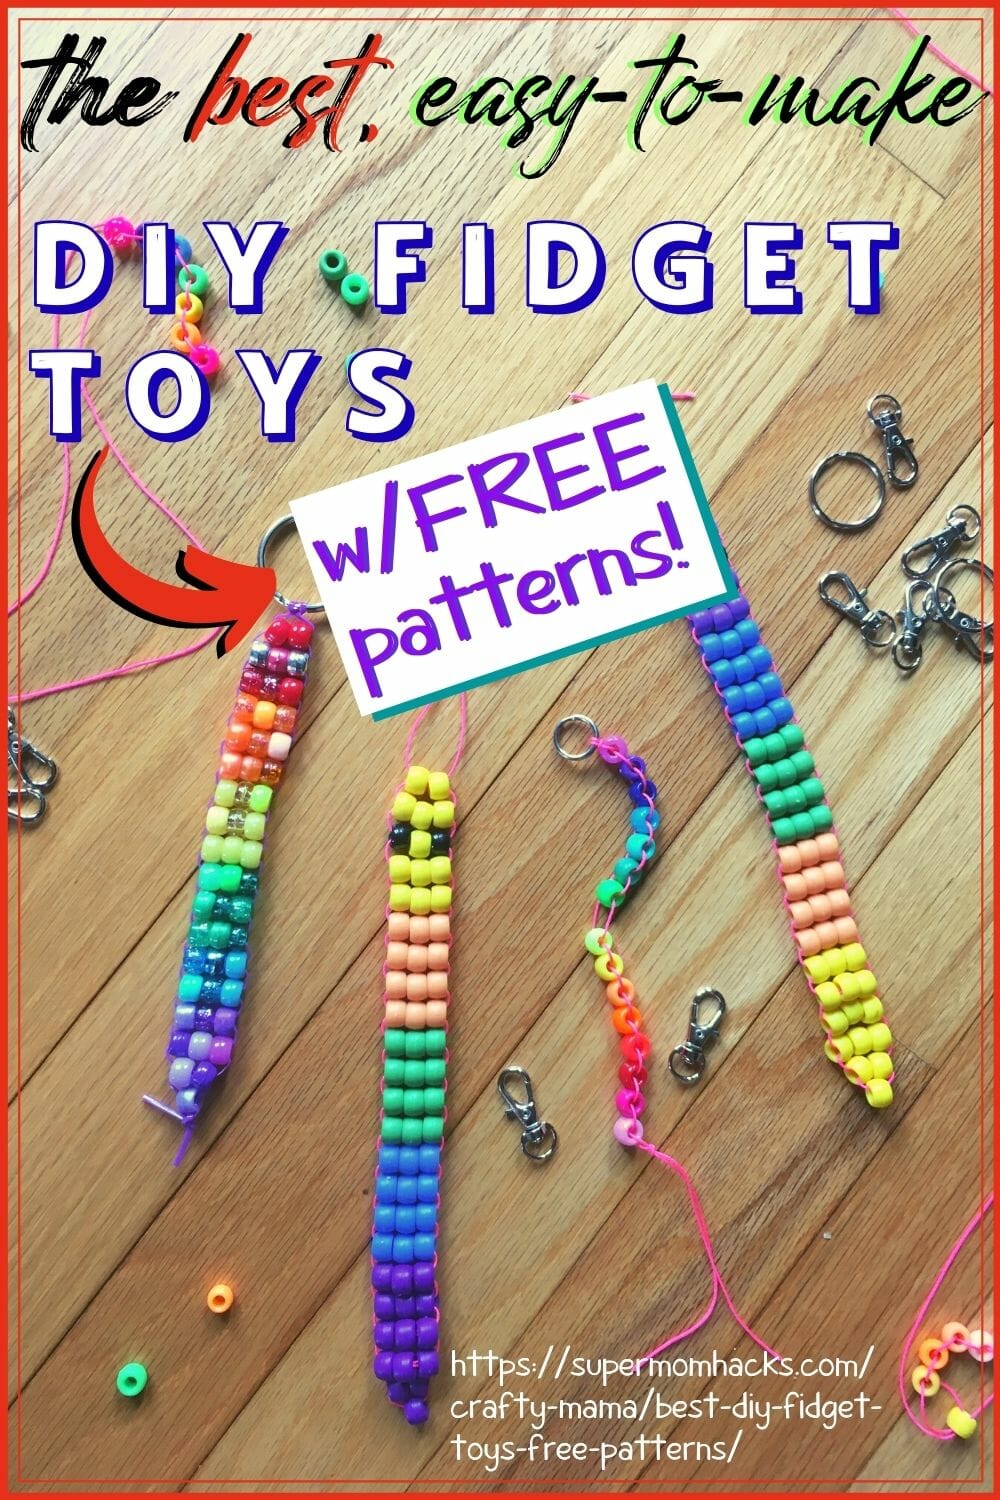 DIY fidget toys are fun to make, and will help kids stay calm and focused when school starts. These cute beaded snakes are my kids' fave, and easy to make. The Best DIY Fidget Toys (Easy To Make!) - SuperMomHacks | diy fidget toys for anxiety | diy fidget toys for the classroom | diy fidget toys for autism | diy fidget toys for adhd | diy fidget toys for school | diy fidget toys easy to make | diy fidget toys with household items | diy fidget toys for adults | best diy fidget toys | beaded snake